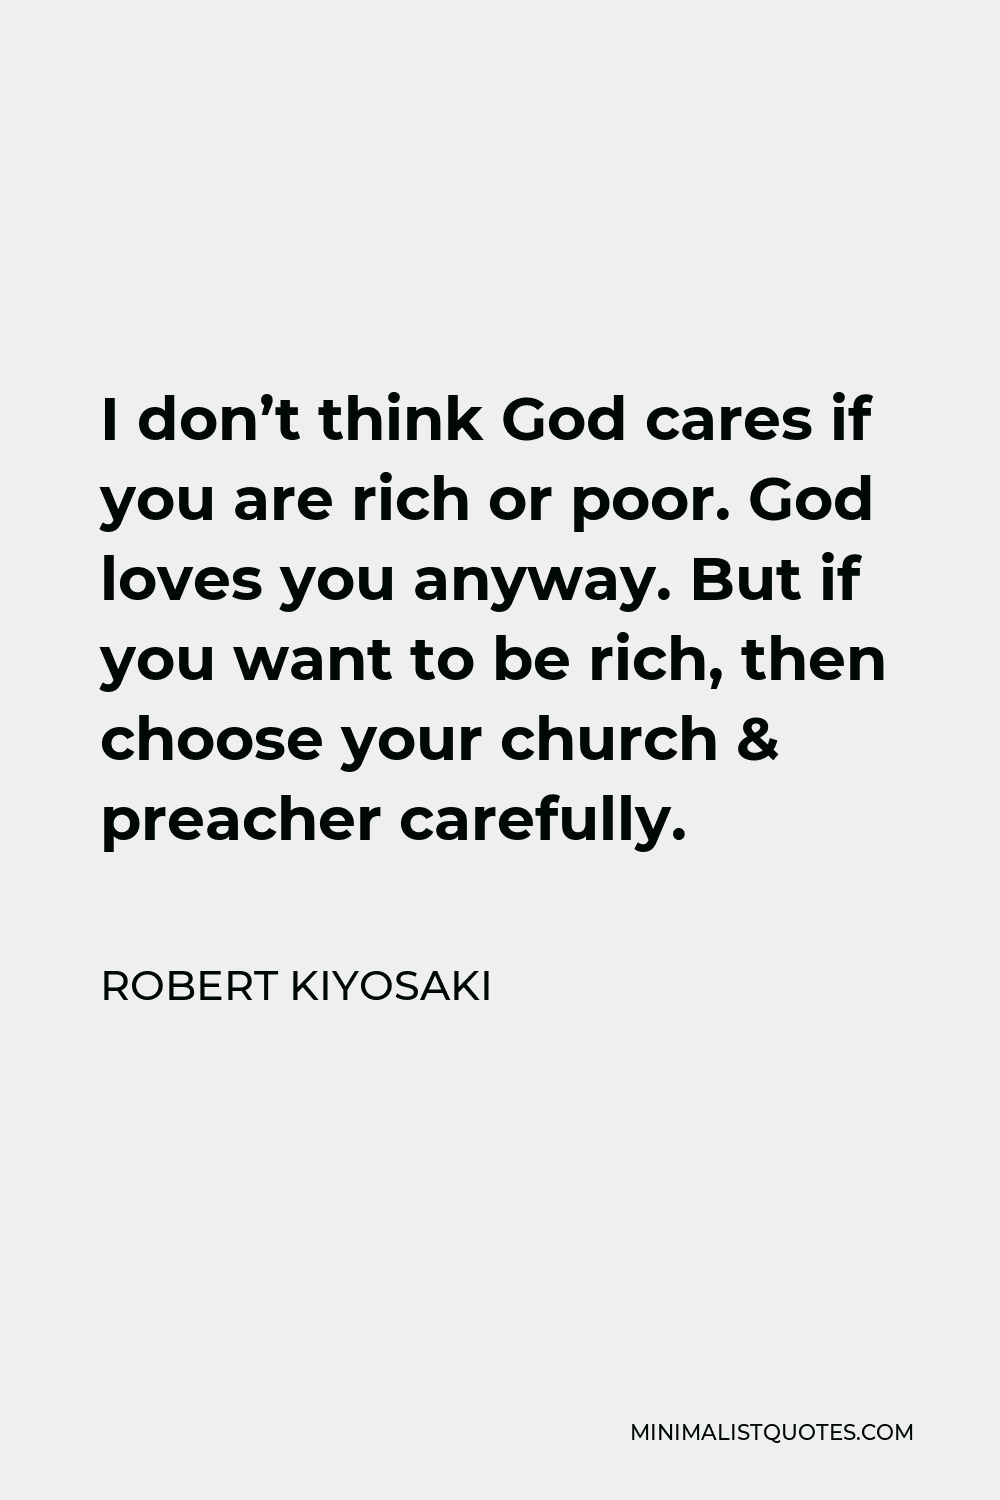 Robert Kiyosaki Quote - I don’t think God cares if you are rich or poor. God loves you anyway. But if you want to be rich, then choose your church & preacher carefully.